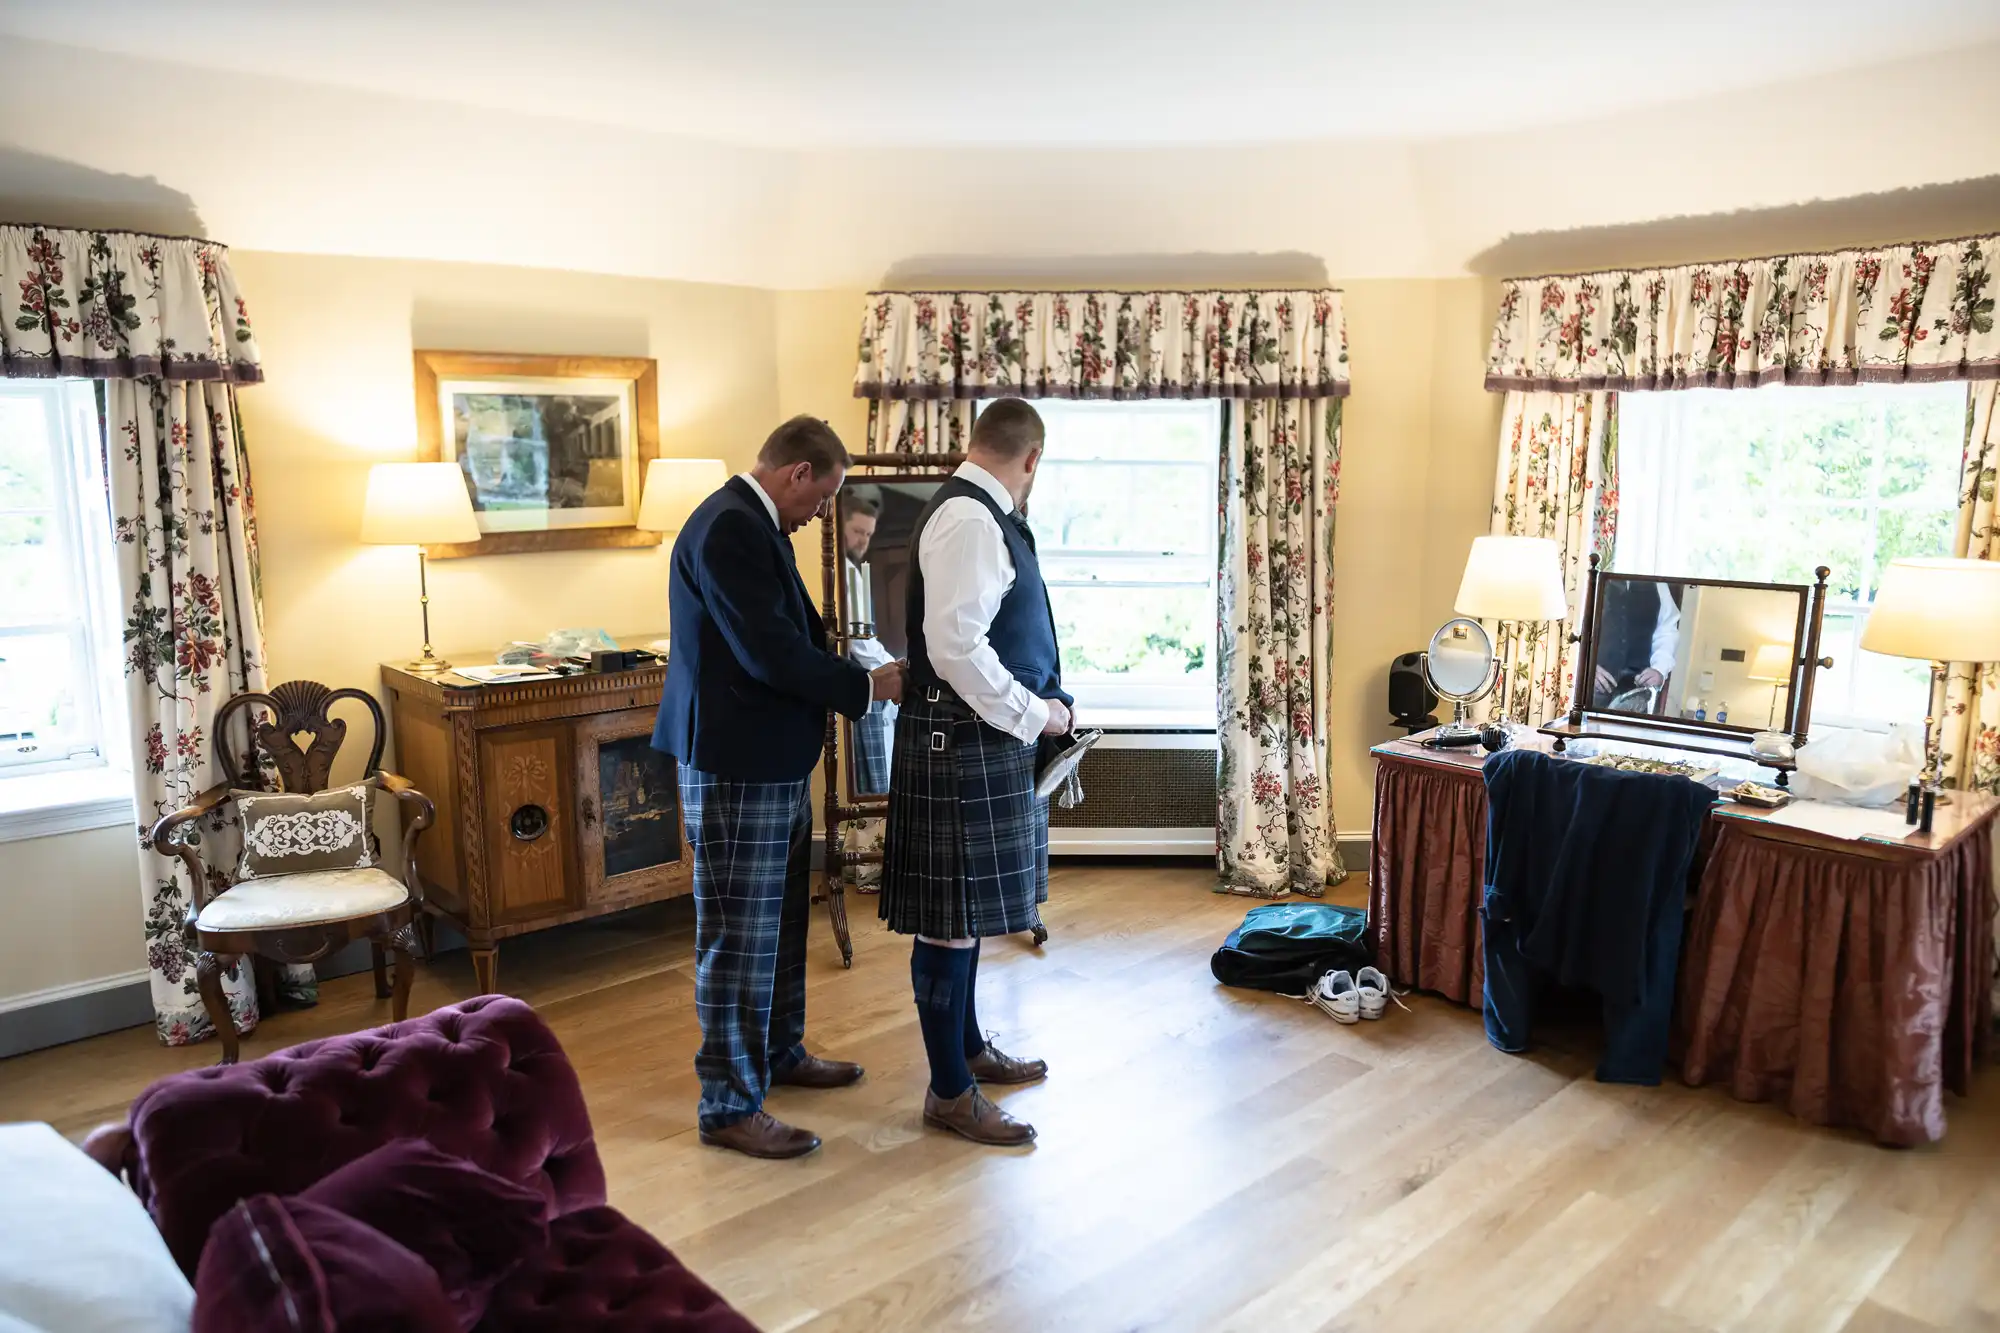 Two men in kilts adjust attire in a traditional room with floral curtains and antique furniture.